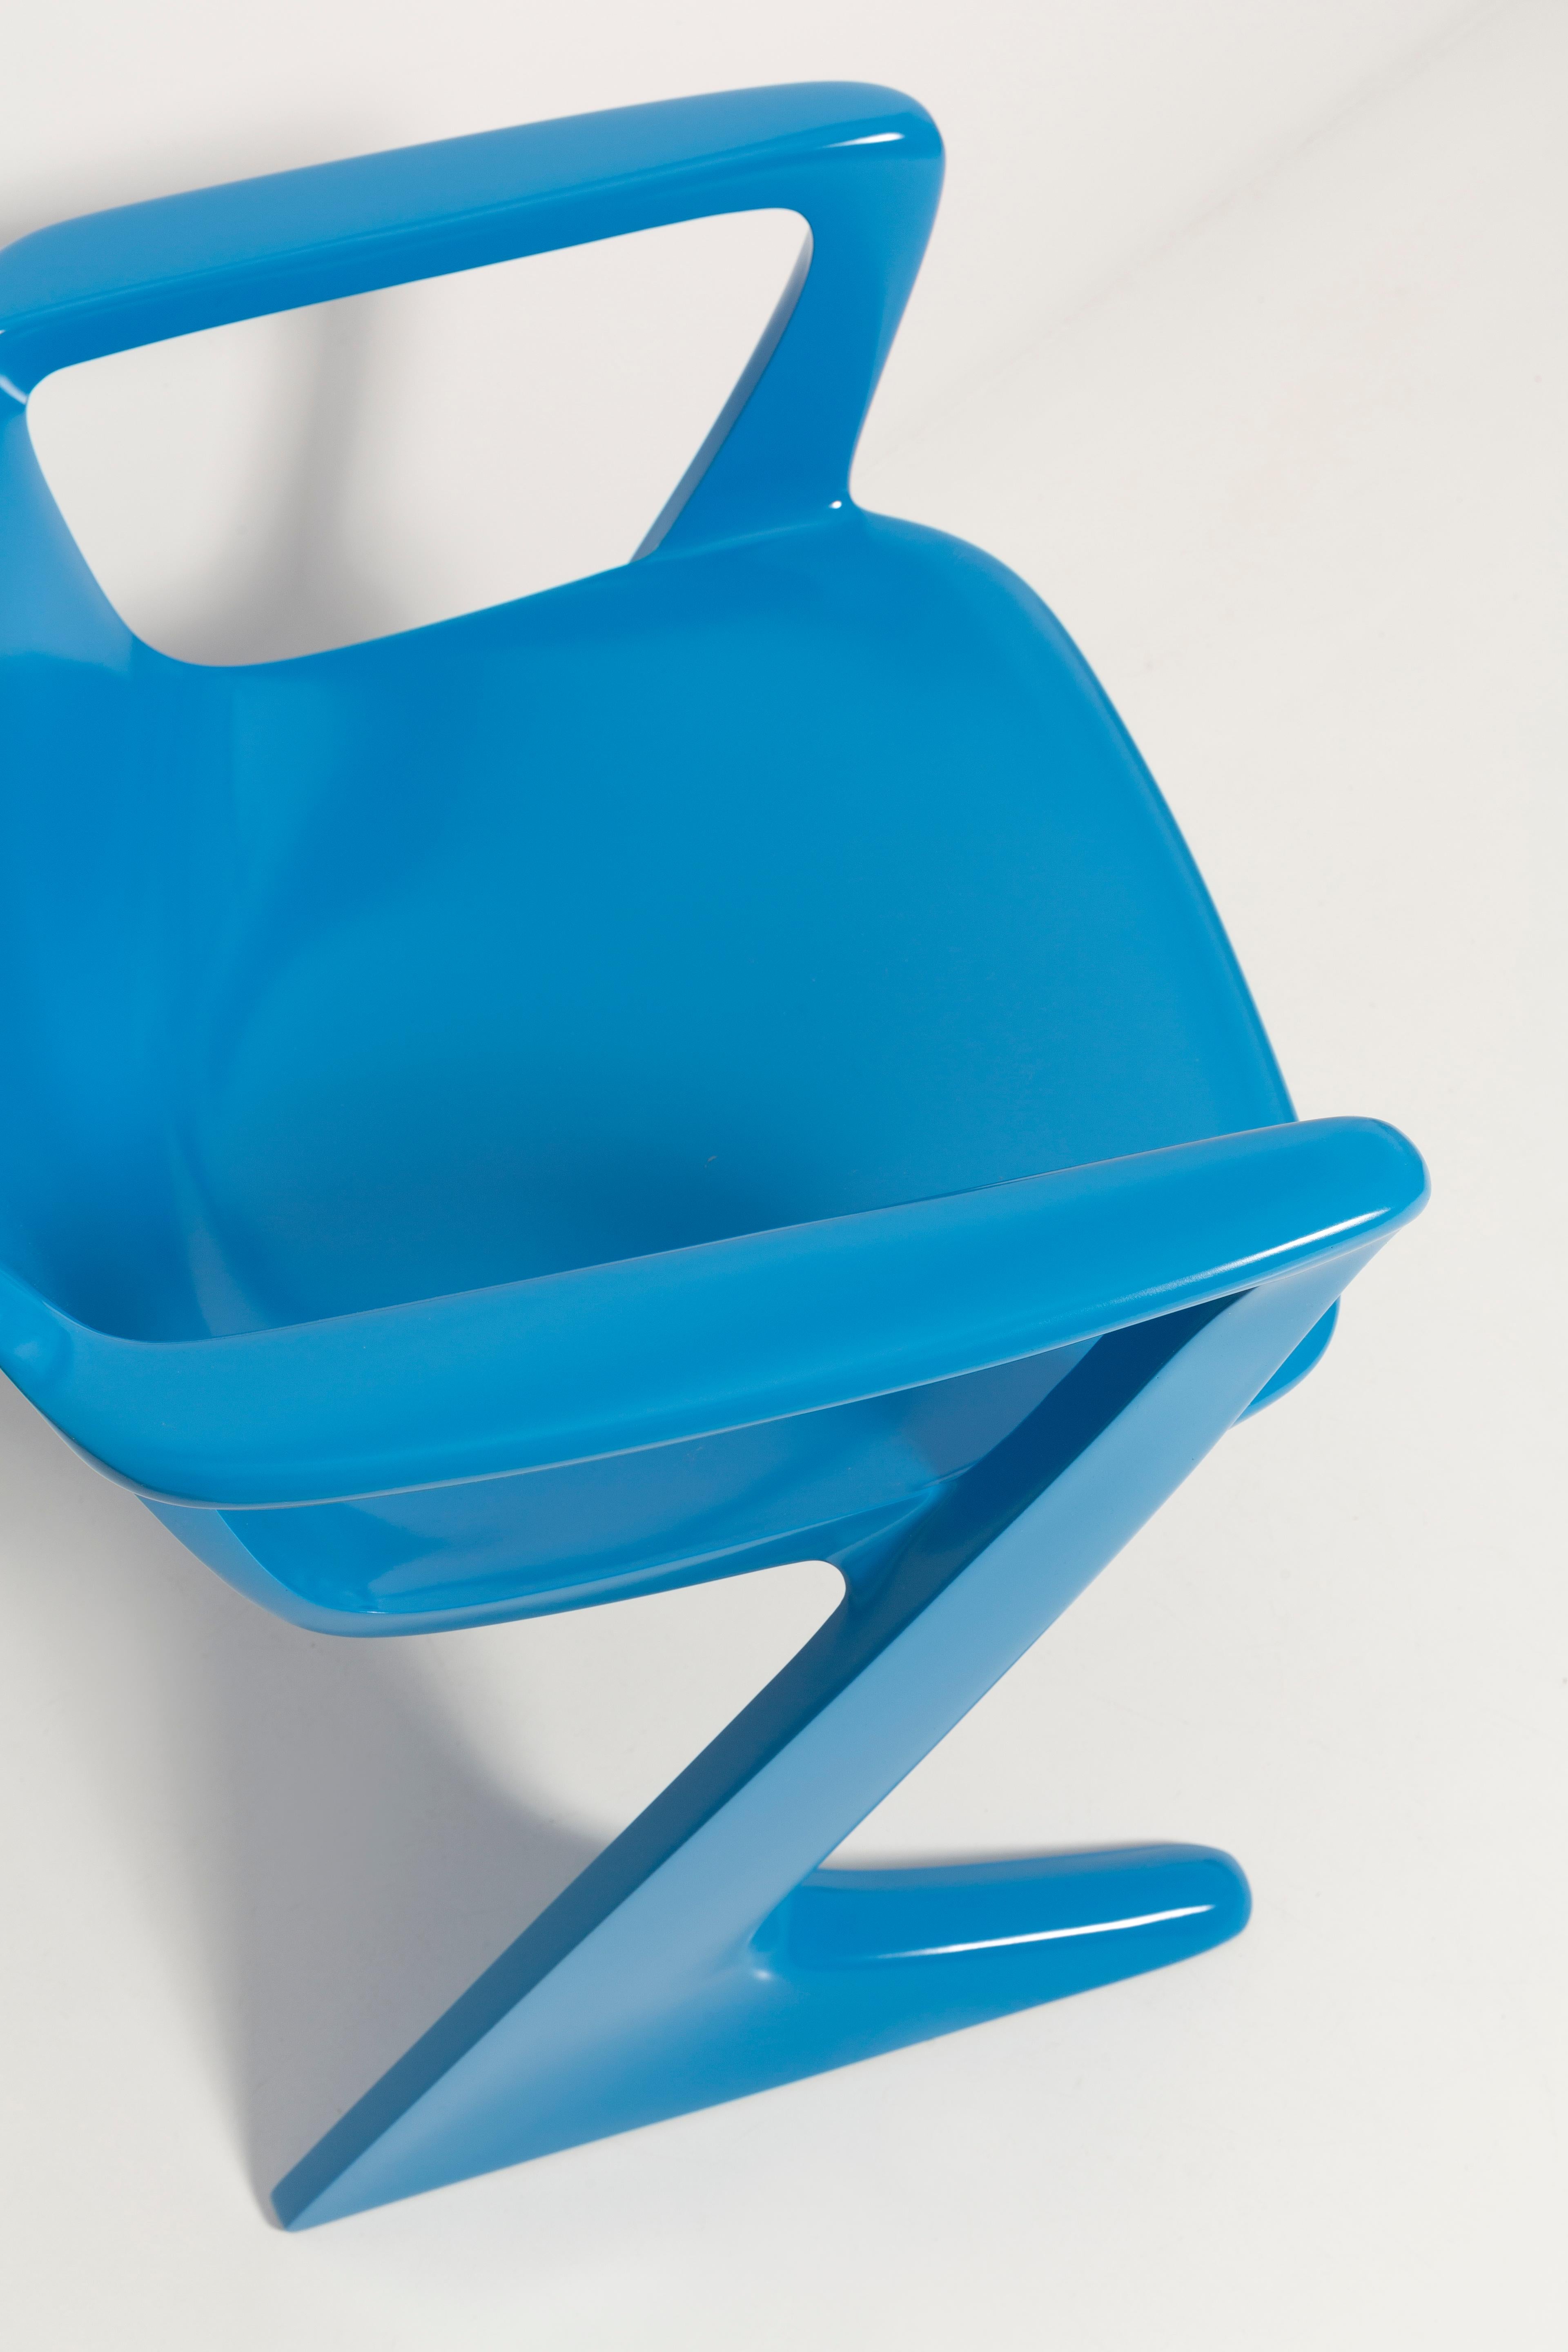 Lacquered Blue Kangaroo Chair Designed by Ernst Moeckl, Germany, 1968 For Sale